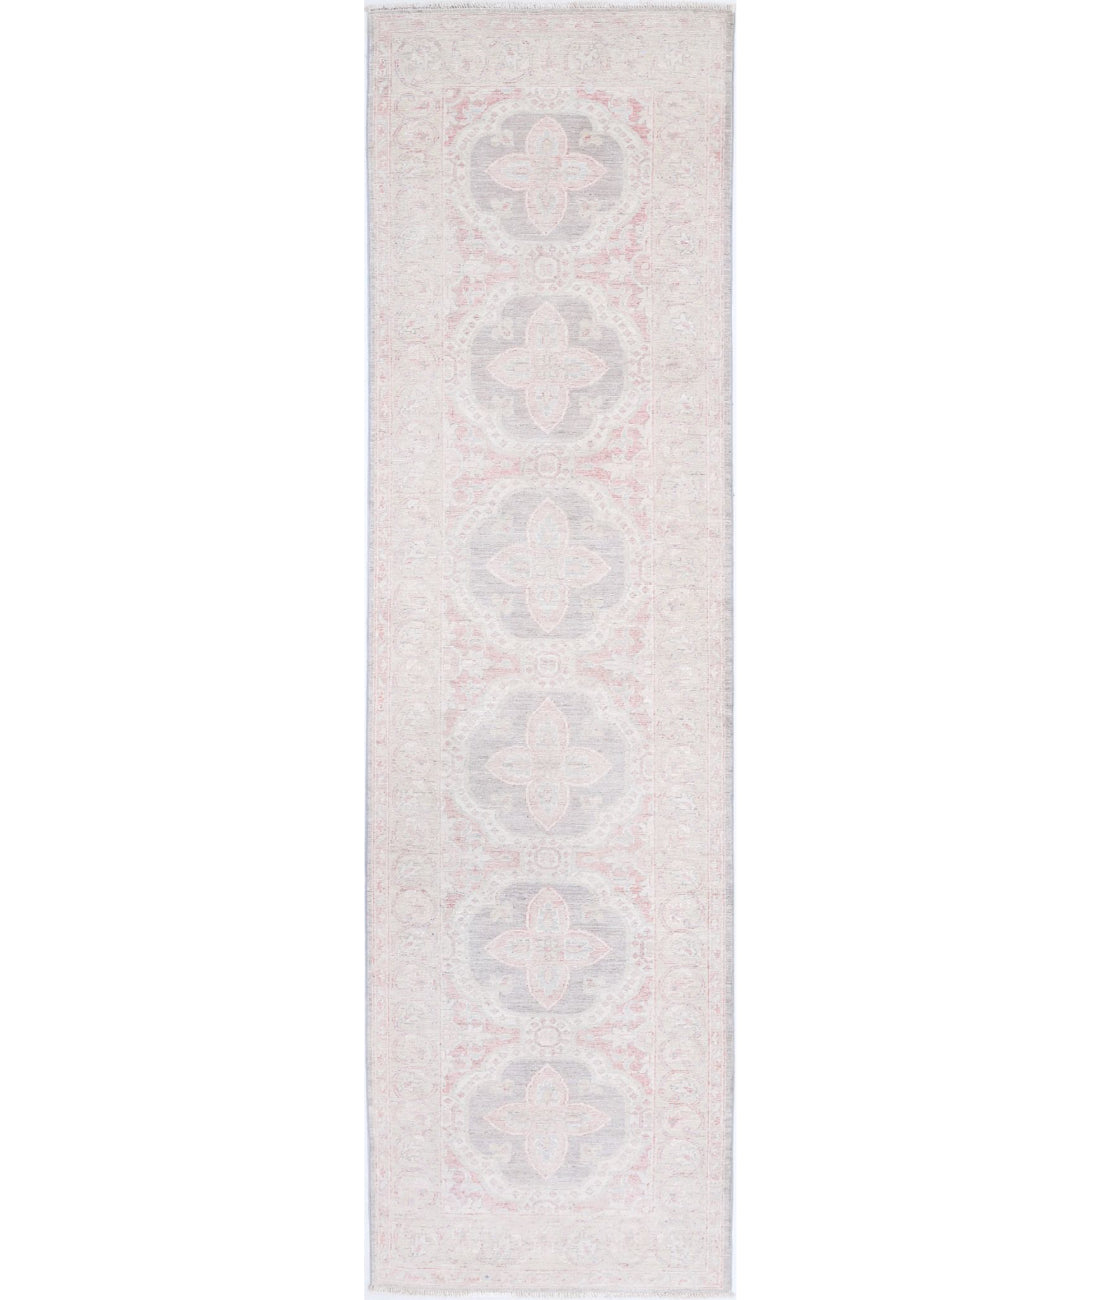 Hand Knotted Serenity Wool Rug - 2'7'' x 9'9'' 2'7'' x 9'9'' (78 X 293) / Grey / Ivory